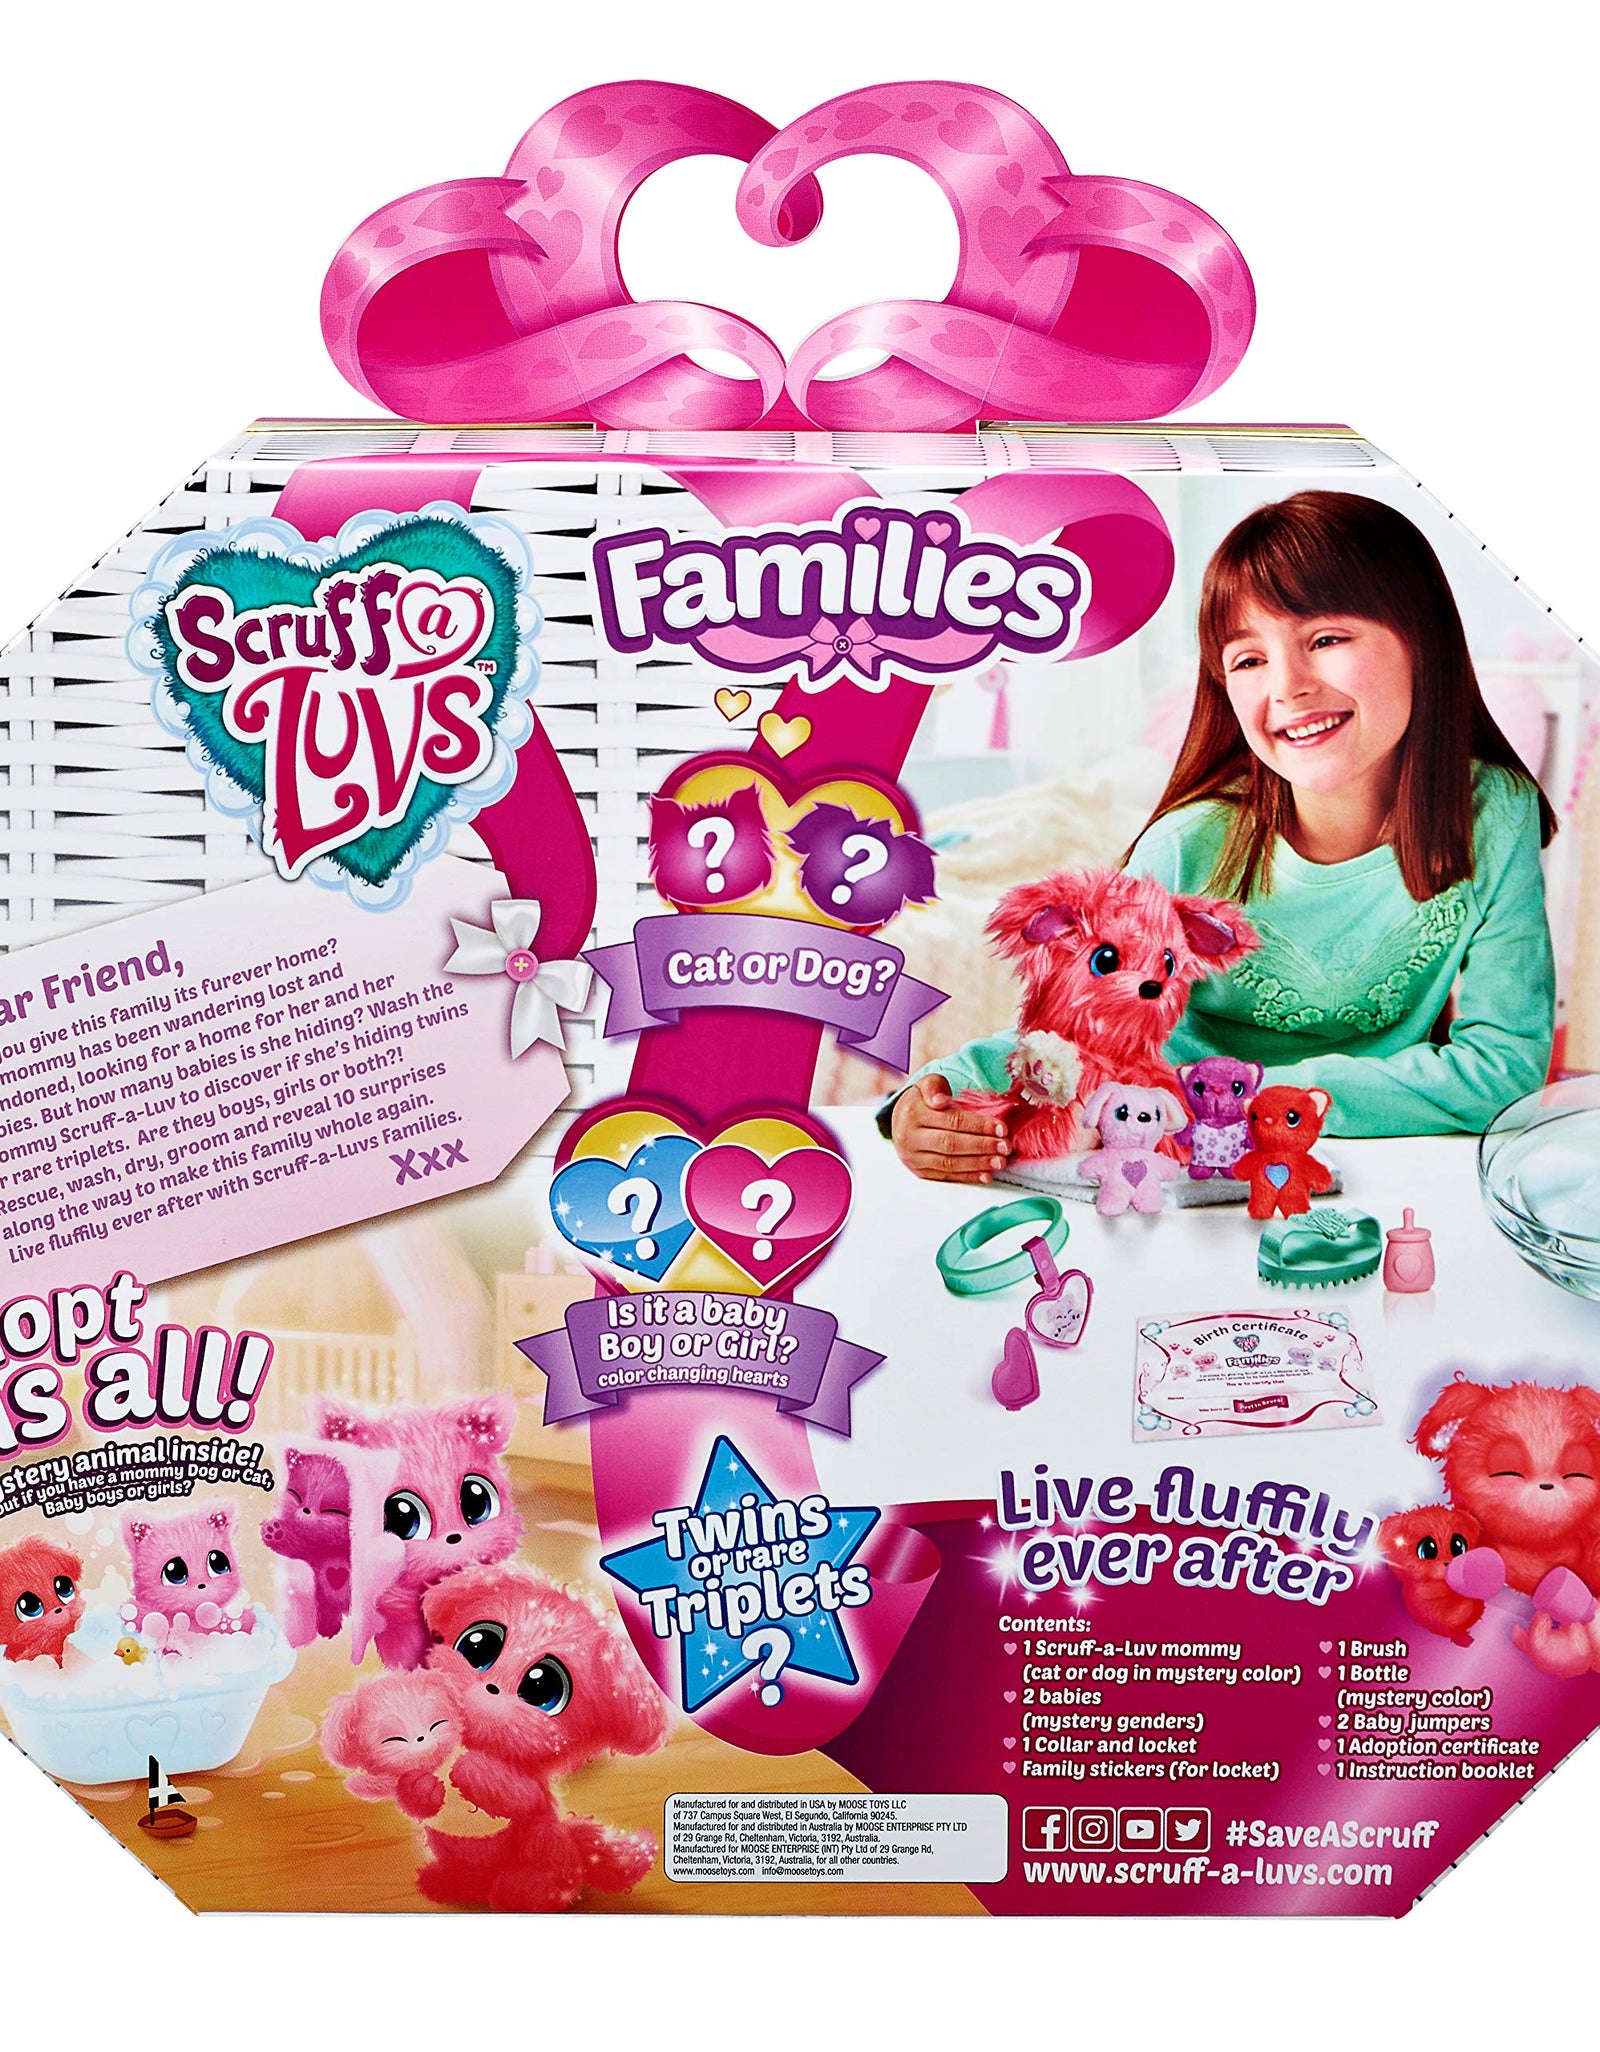 Little Live Pets Scruff-A-Luvs Family | Wash, Dry and Brush to Rescue and Reveal 10 Surprises